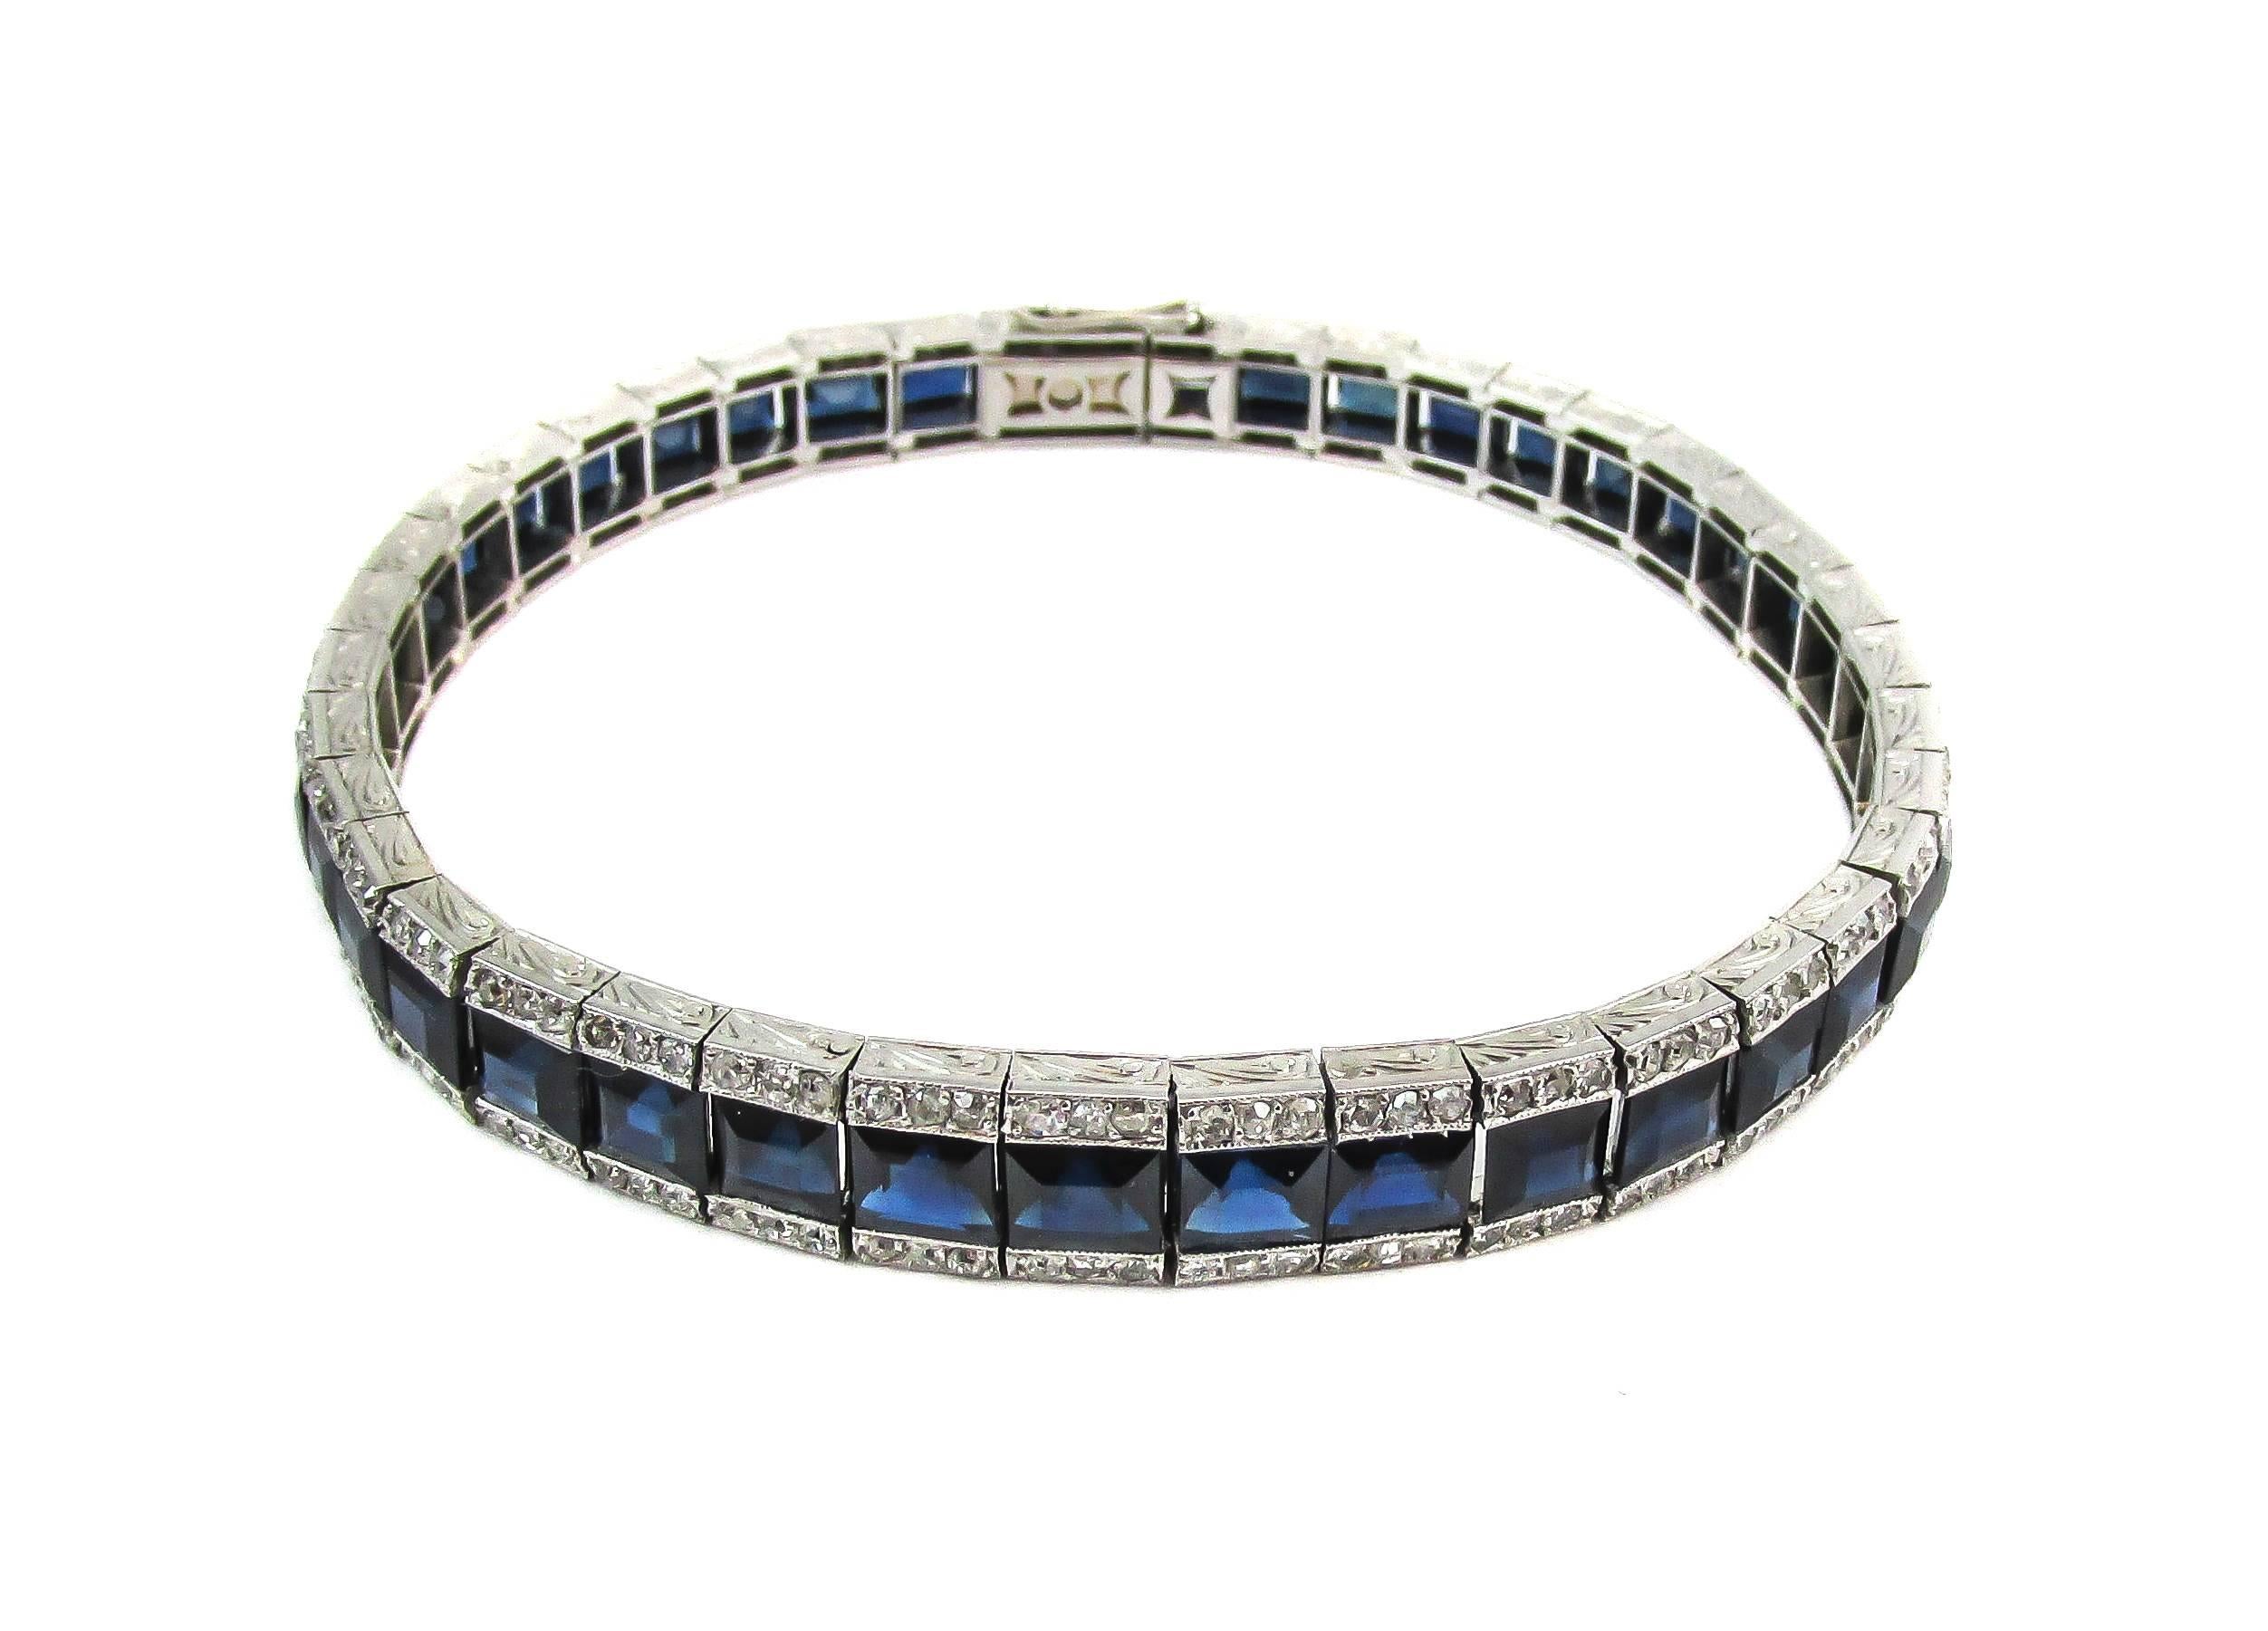 This elegant Art Deco platinum bracelet is centrally set with 41 rectangular deep blue step cut sapphires weighing approximately 20 carats. Bordering the sapphires, small round old cut diamonds are set on either side held within walls of beautifully